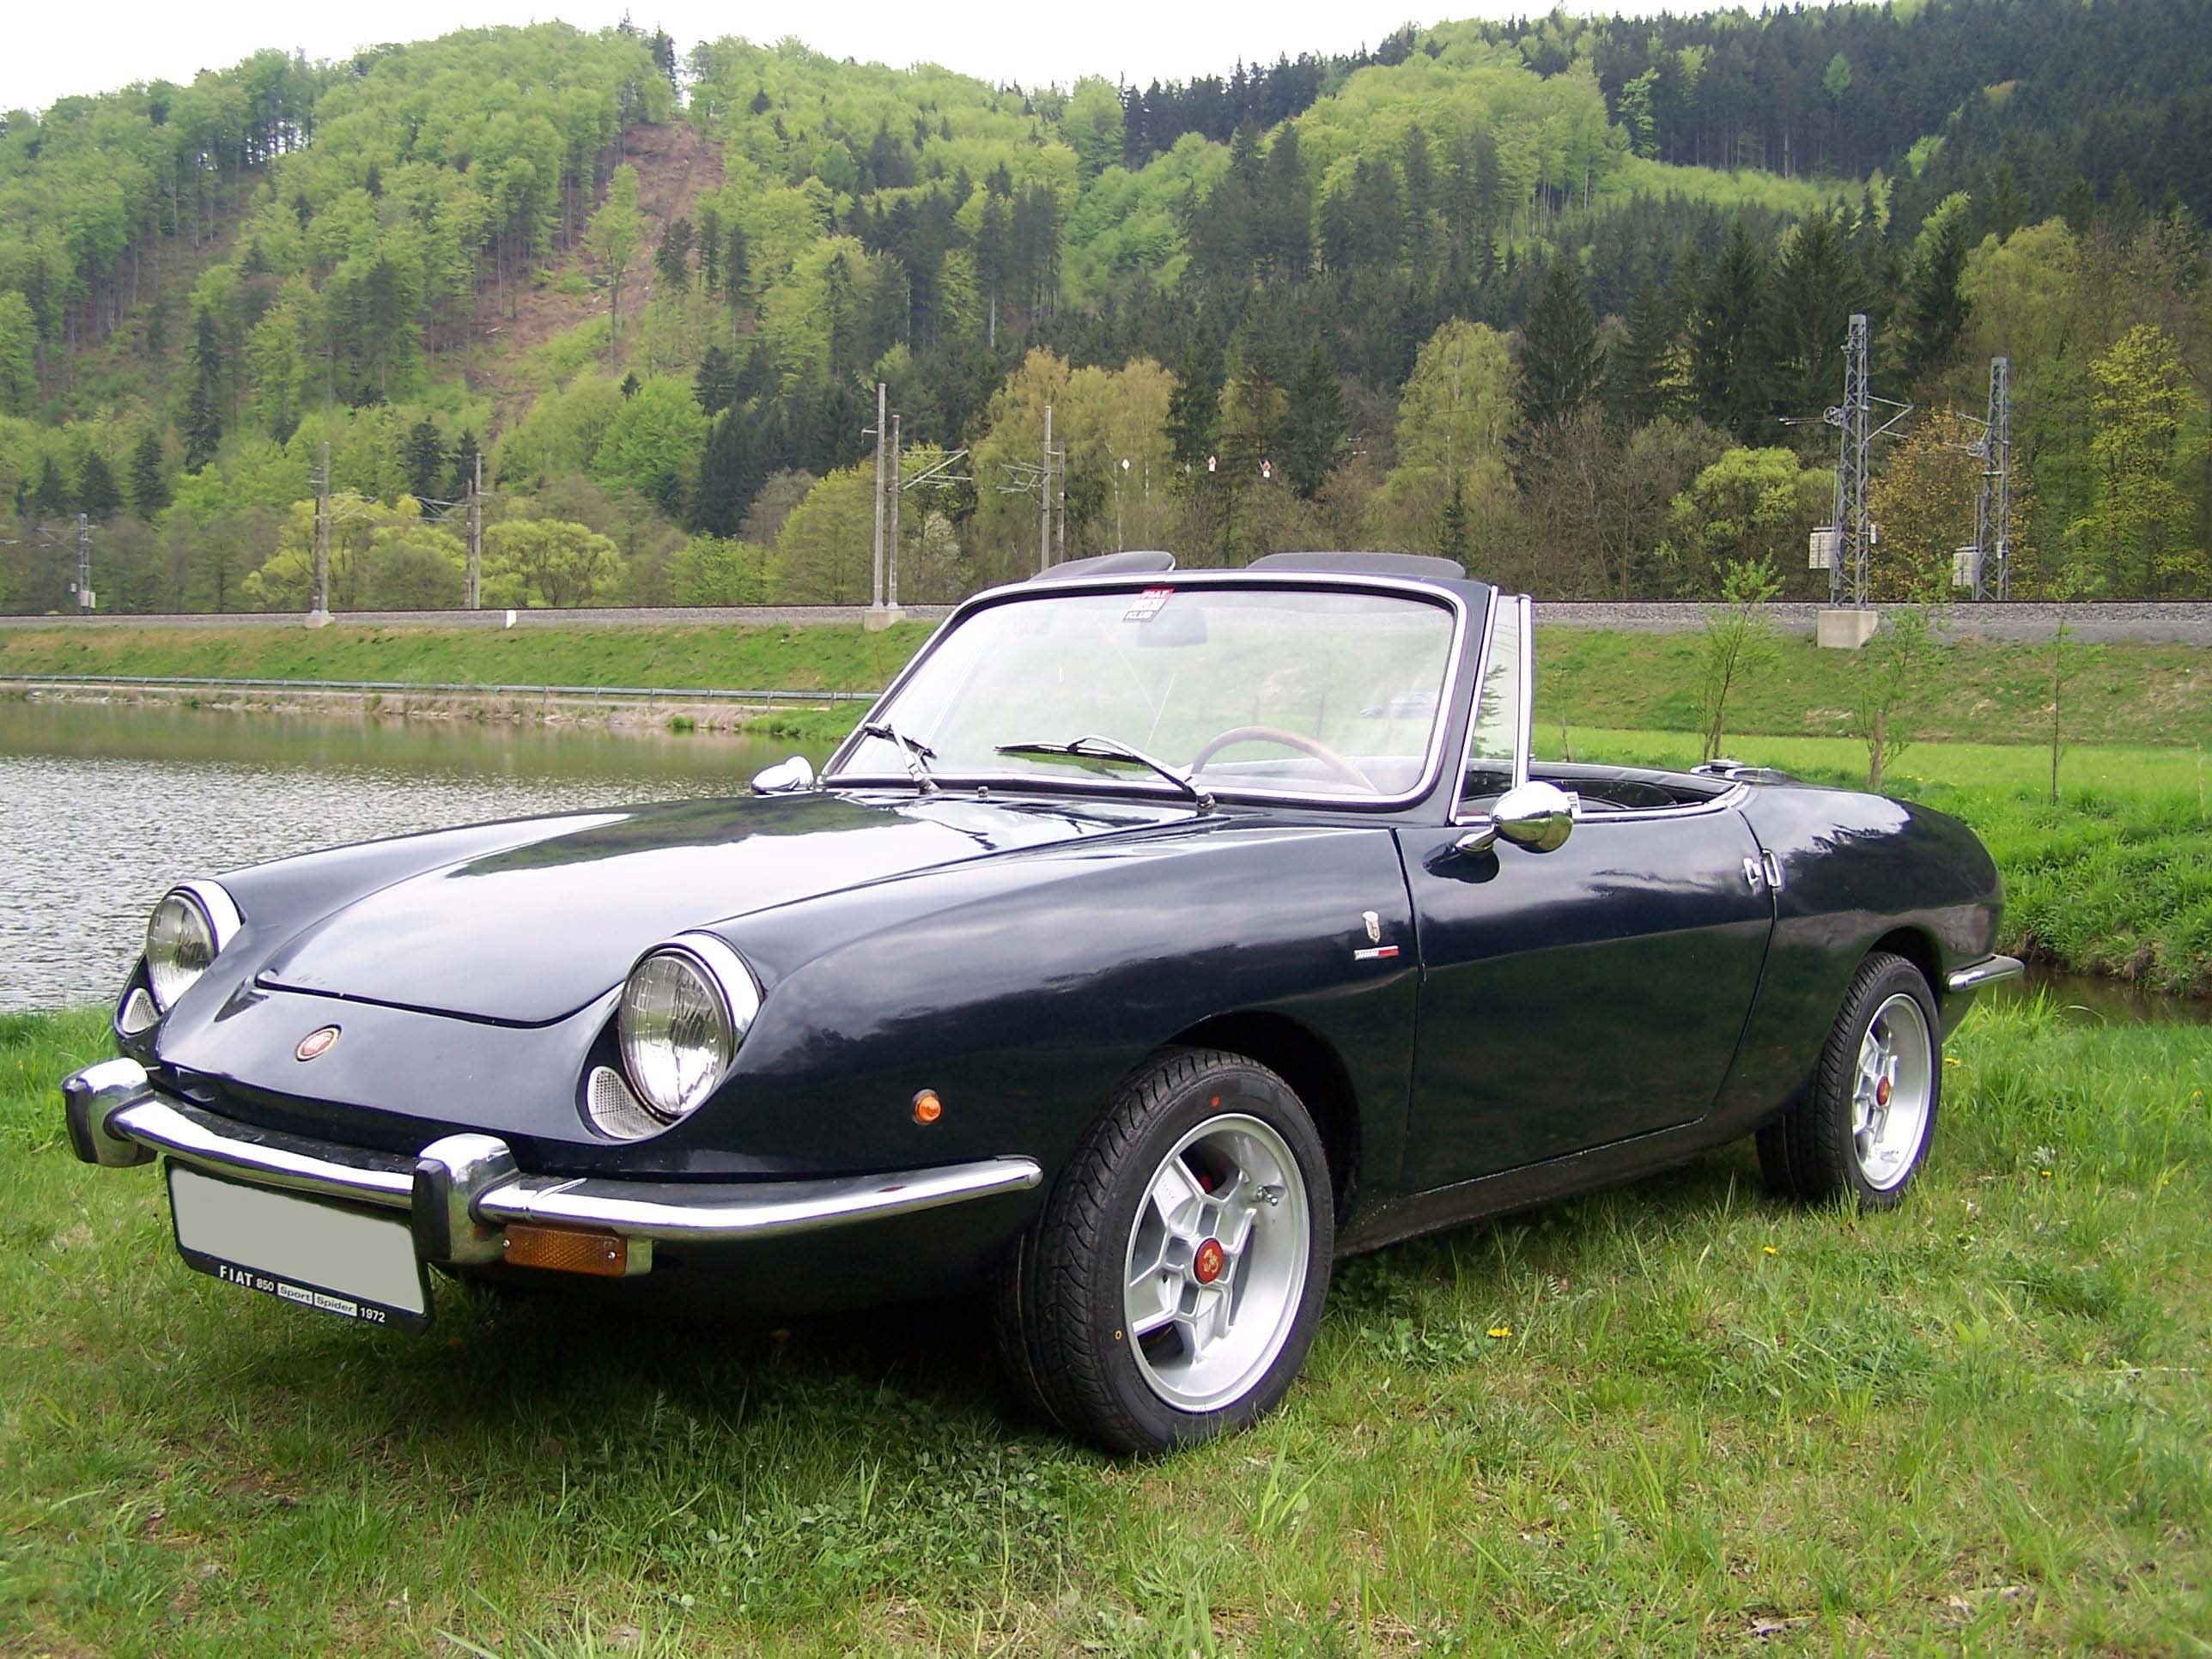 fiat, 850, Sport, Spider, Cars, Cabriolet, Convertible